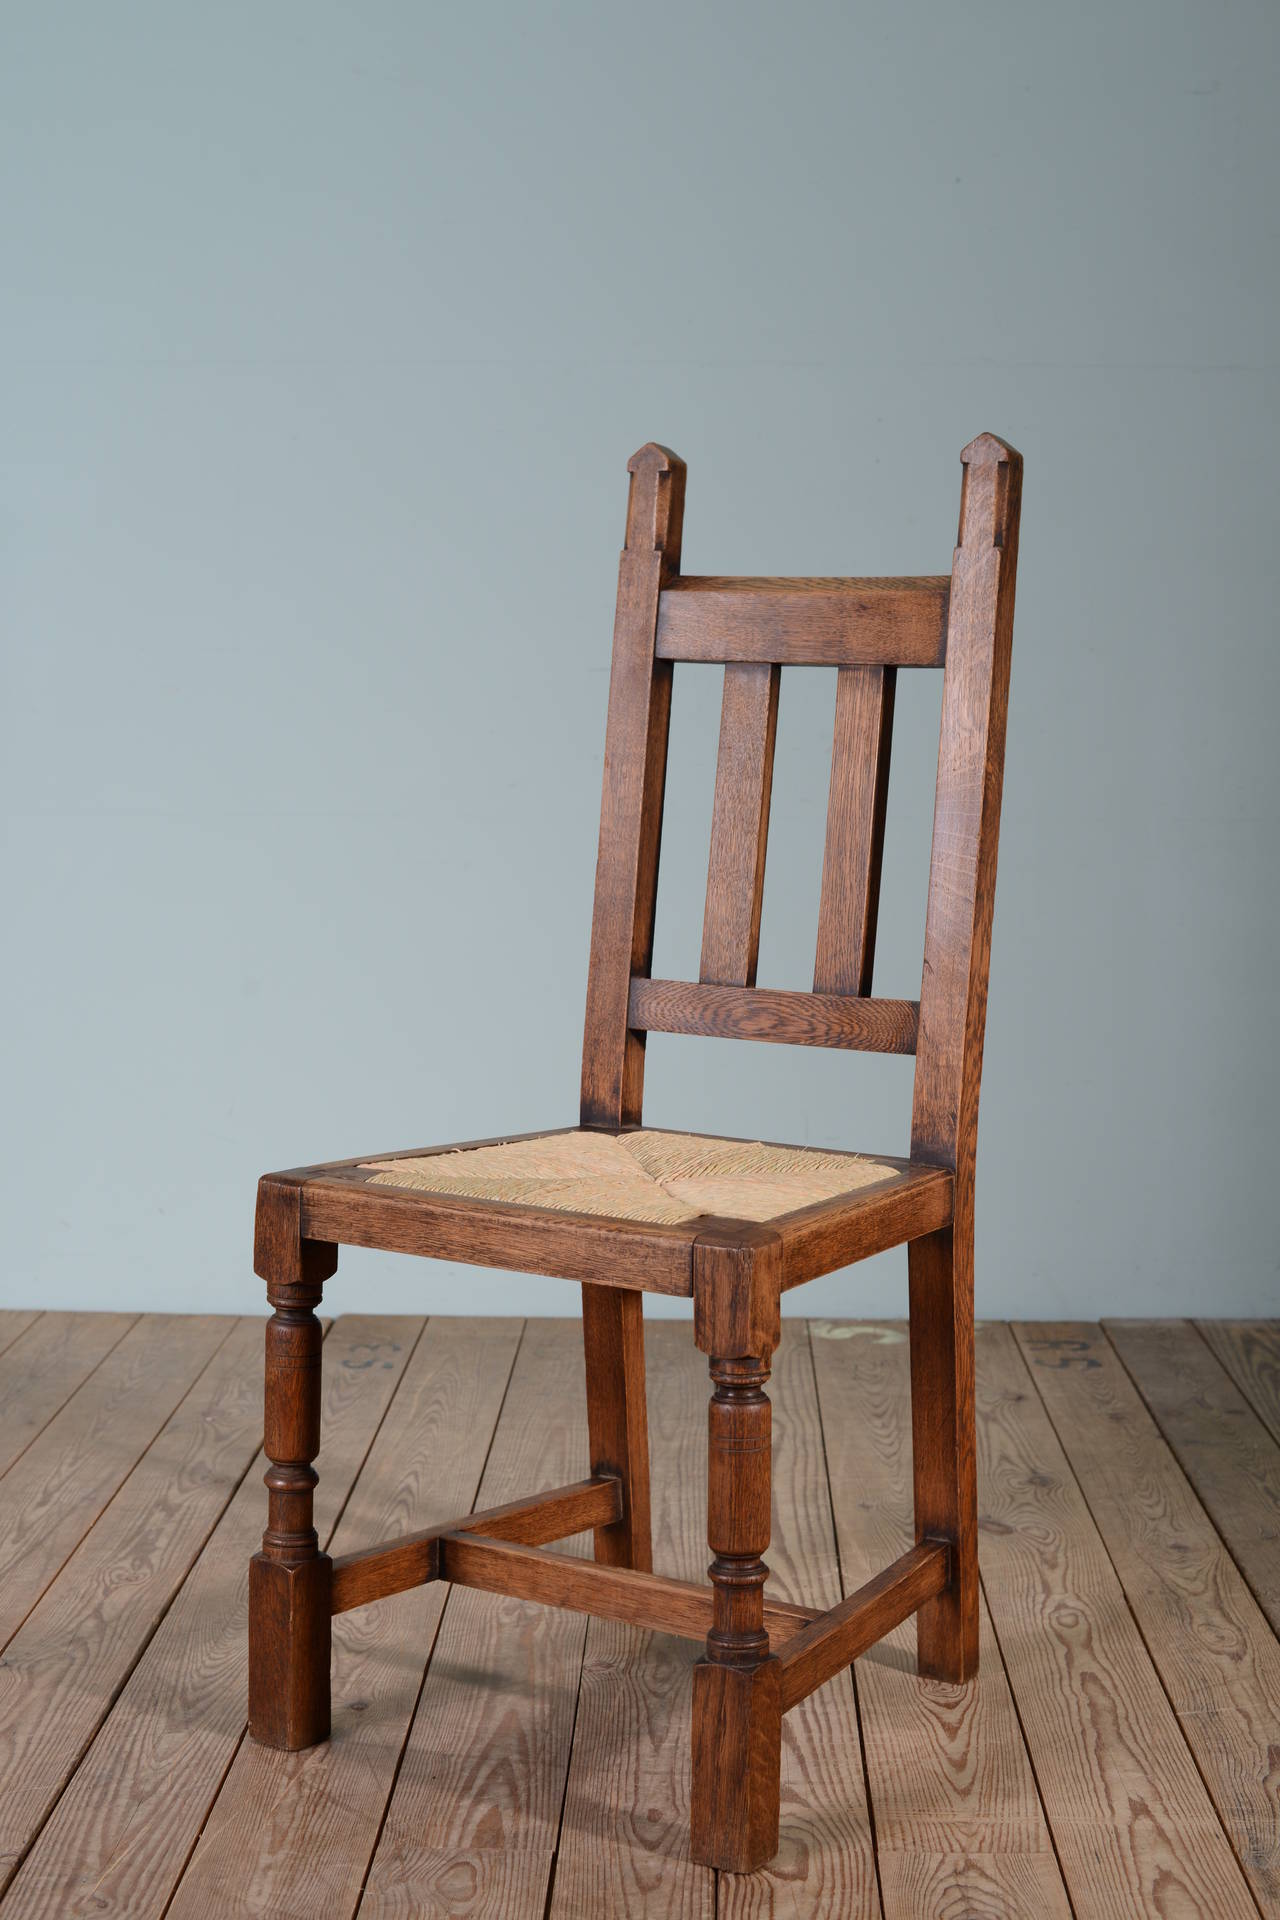 Set of Six Antique Culloden Oak Chairs by Liberty's.
This is a great set of English antique oak dining chairs from the Culloden range by Liberty's of London around 1875.
In excellent, clean condition, all the rush seats have been newly done.
A